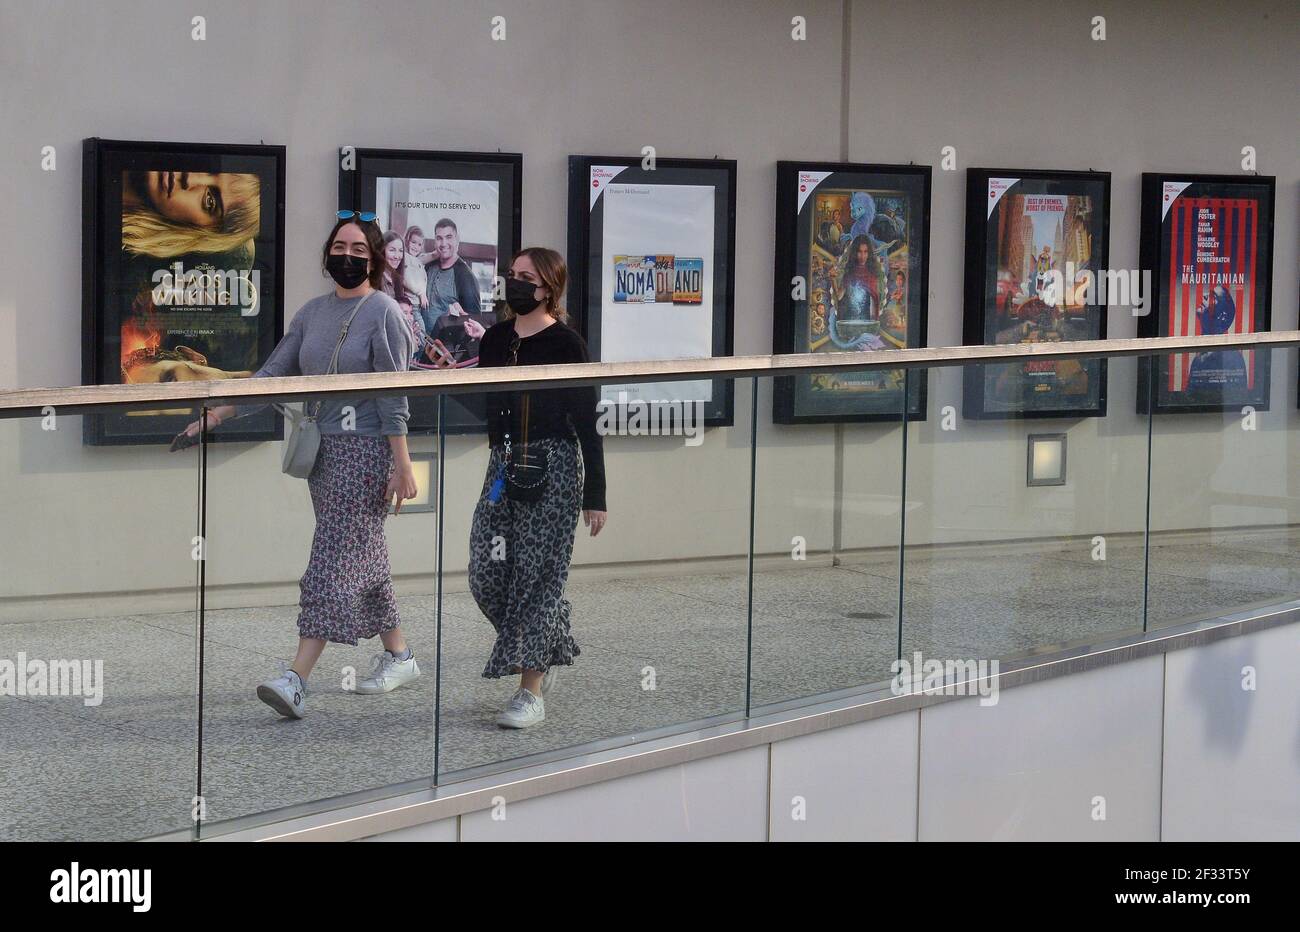 Two women walk past posters of recently released movies at the AMC Theatre in the Westfield Century City mall in Los Angeles on Sunday, March 14, 2021. AMC Theatres, one of the largest movie chains in the United States, will reopen two of its flagship locations in the Los Angeles market; the Burbank 16 and Century City 15 multiplexes today. Moviegoers in the entertainment and film capital of the world can finally watch films in theaters again after nearly a year of closures and restrictions brought on by the coronavirus pandemic. Photo by Jim Ruymen/UPI Stock Photo